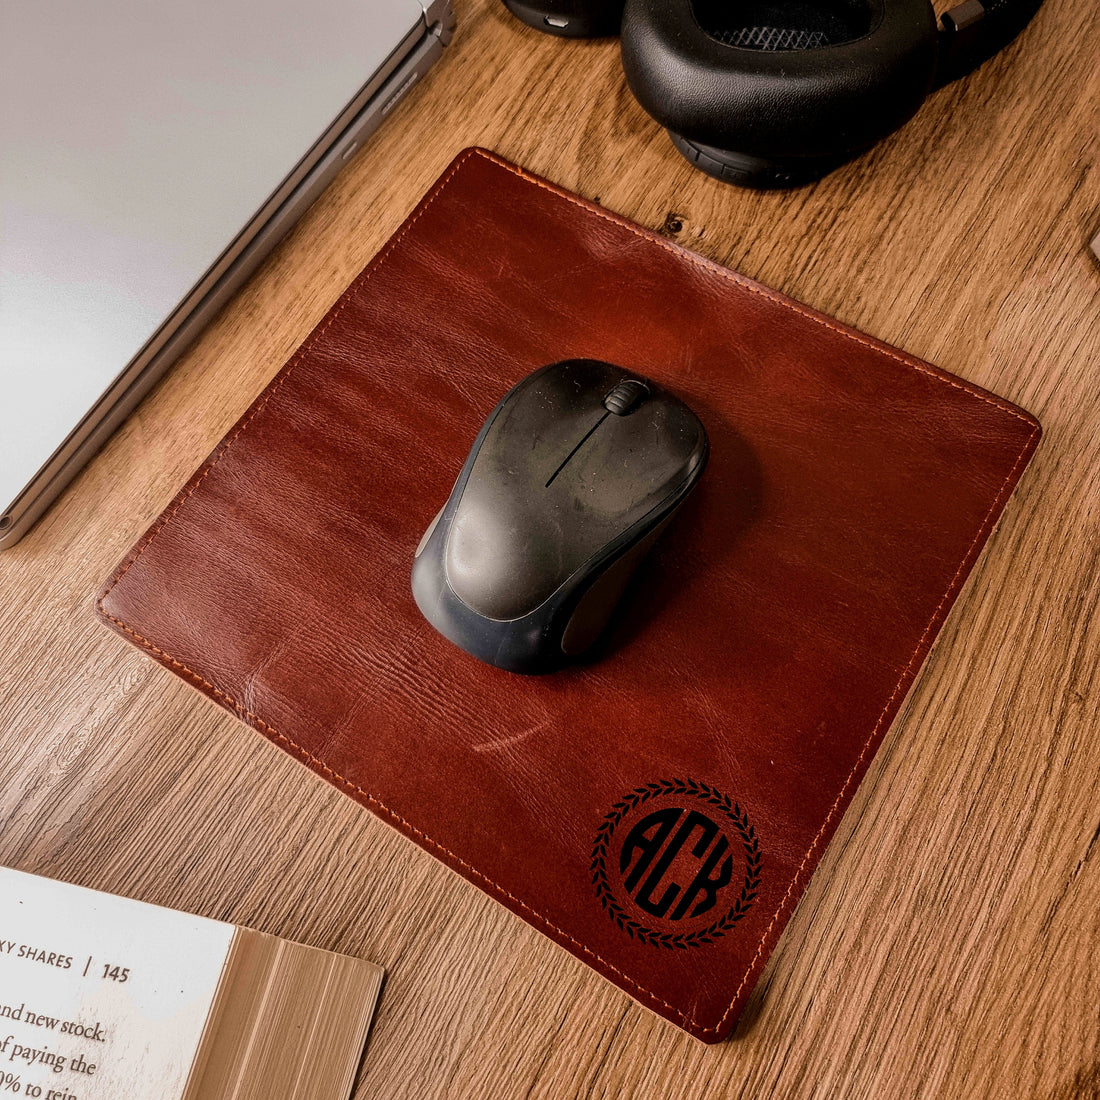 Personalised Genuine Leather Mouse Pad/ Mat, Monogram Custom Engraved Real Leather Office Desk Accessories / Gift for Him/ Father/ Groomsmen